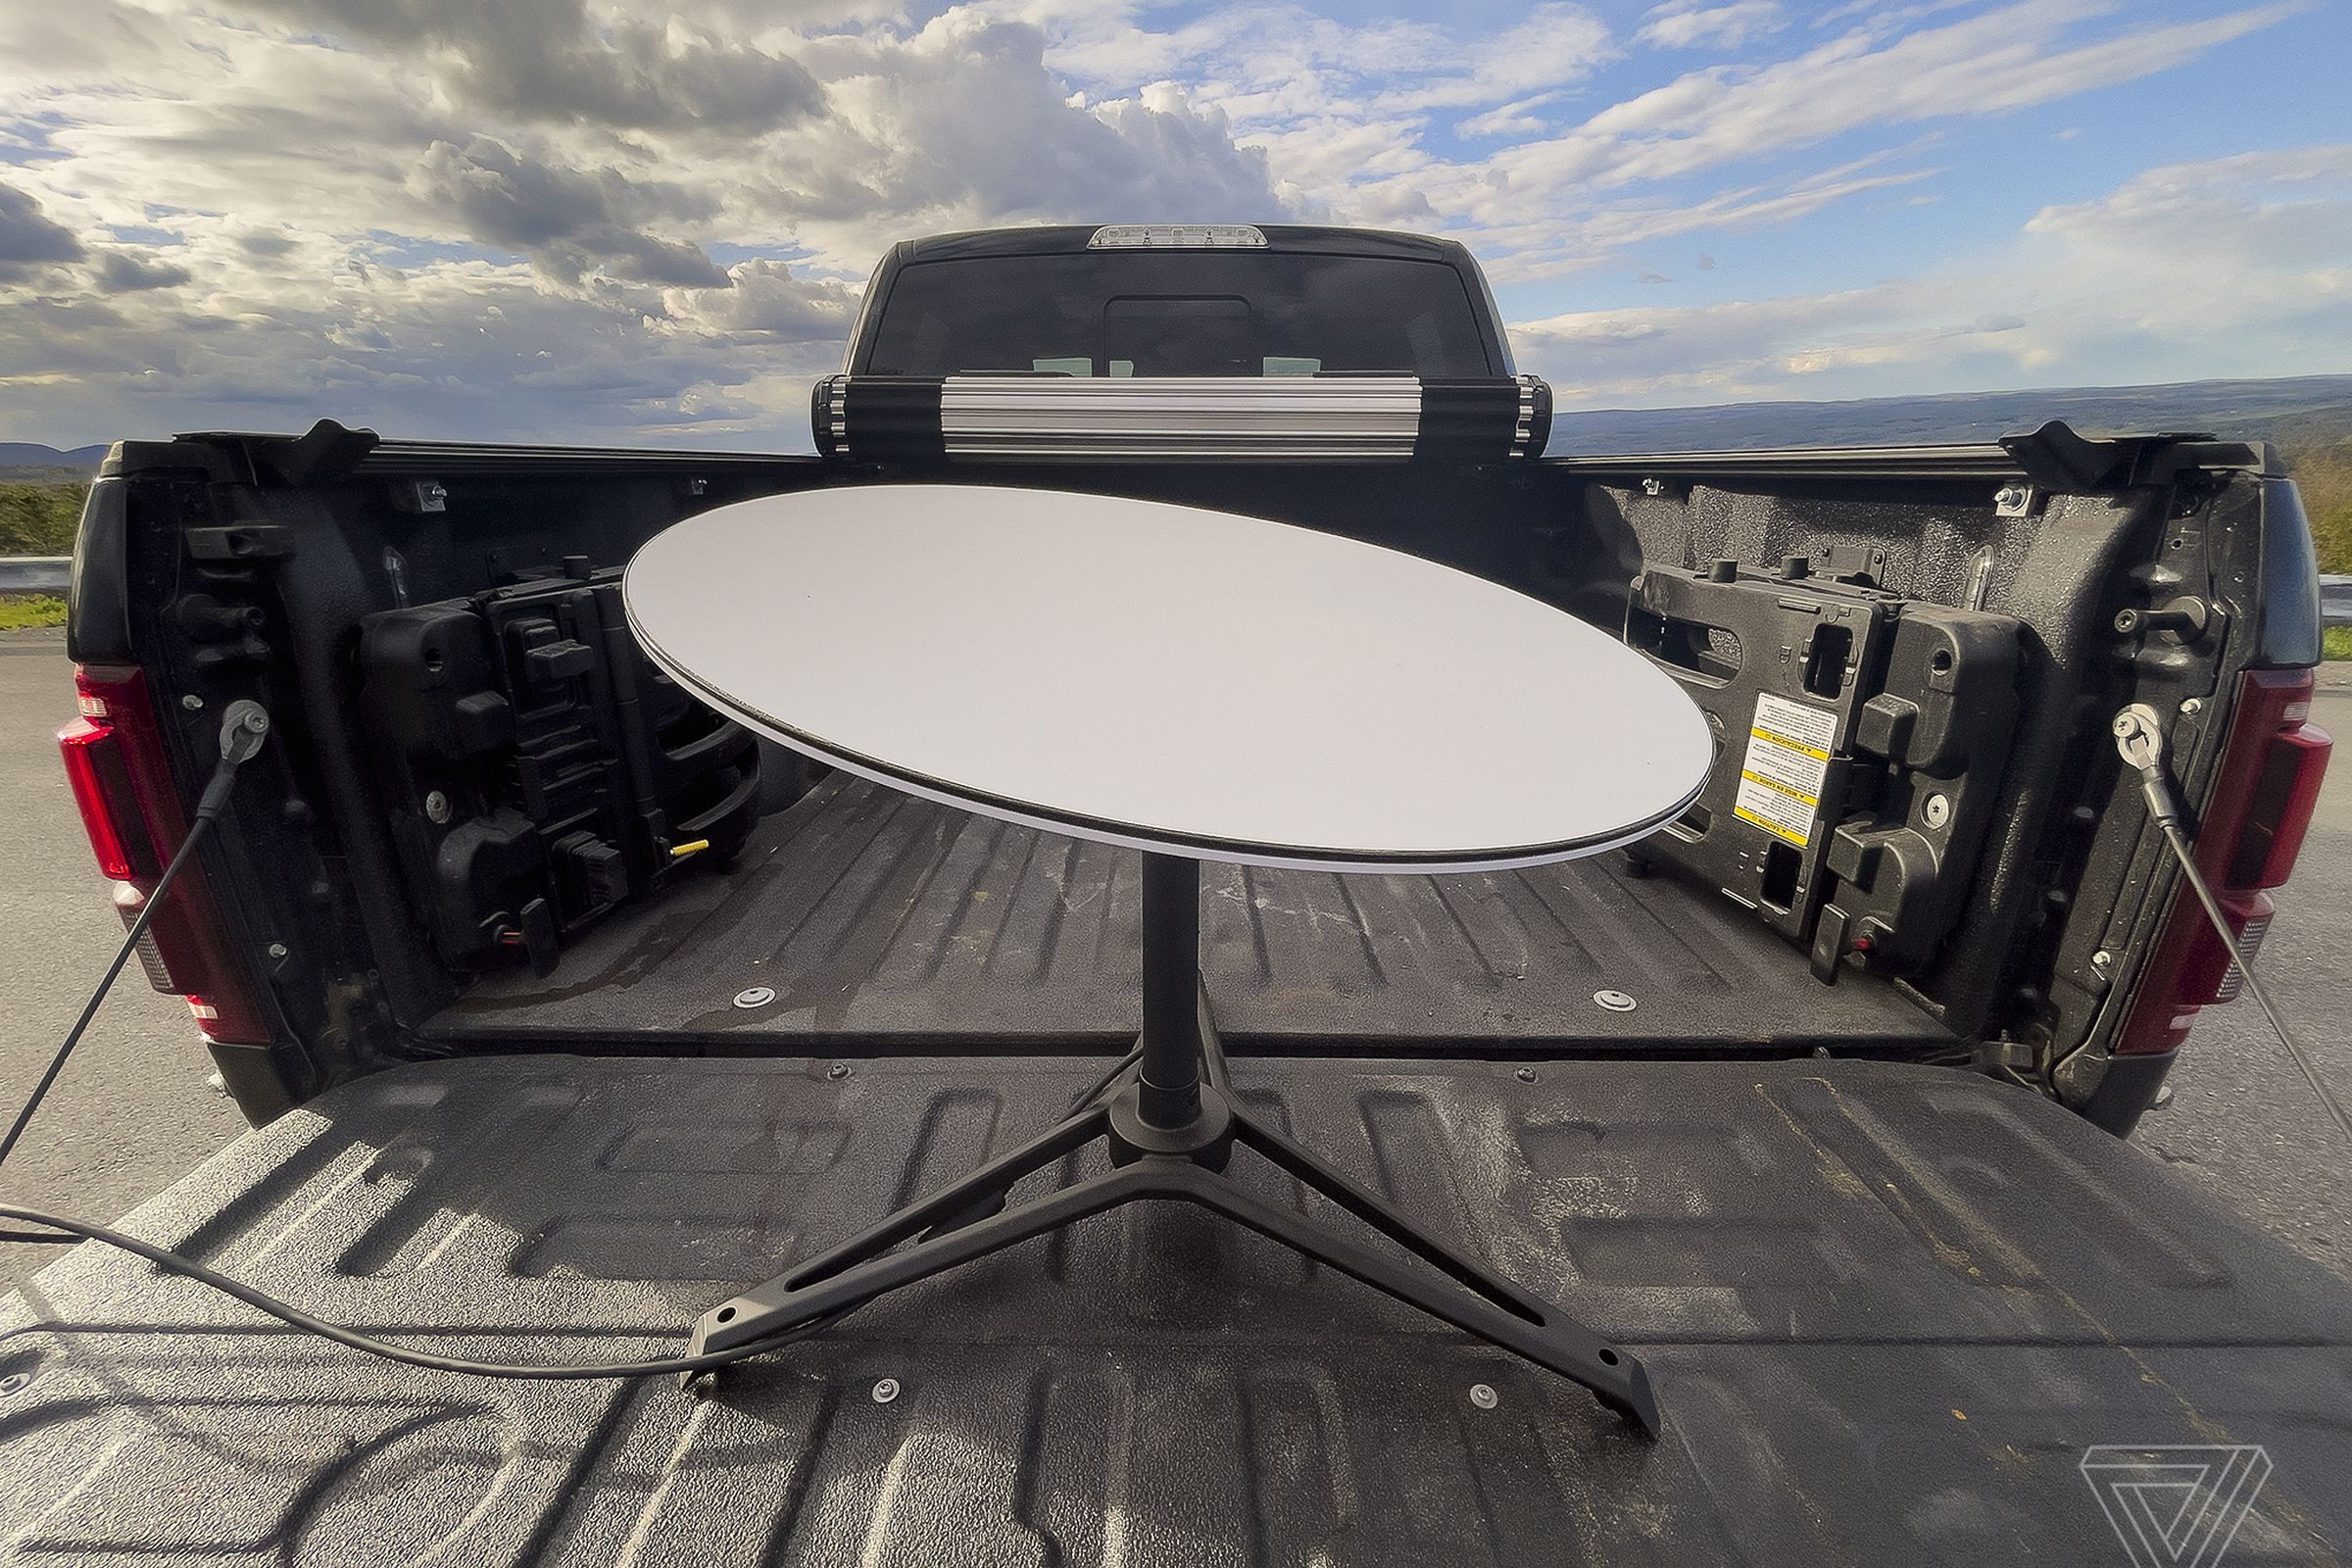 Starlink dish in the back of a truck